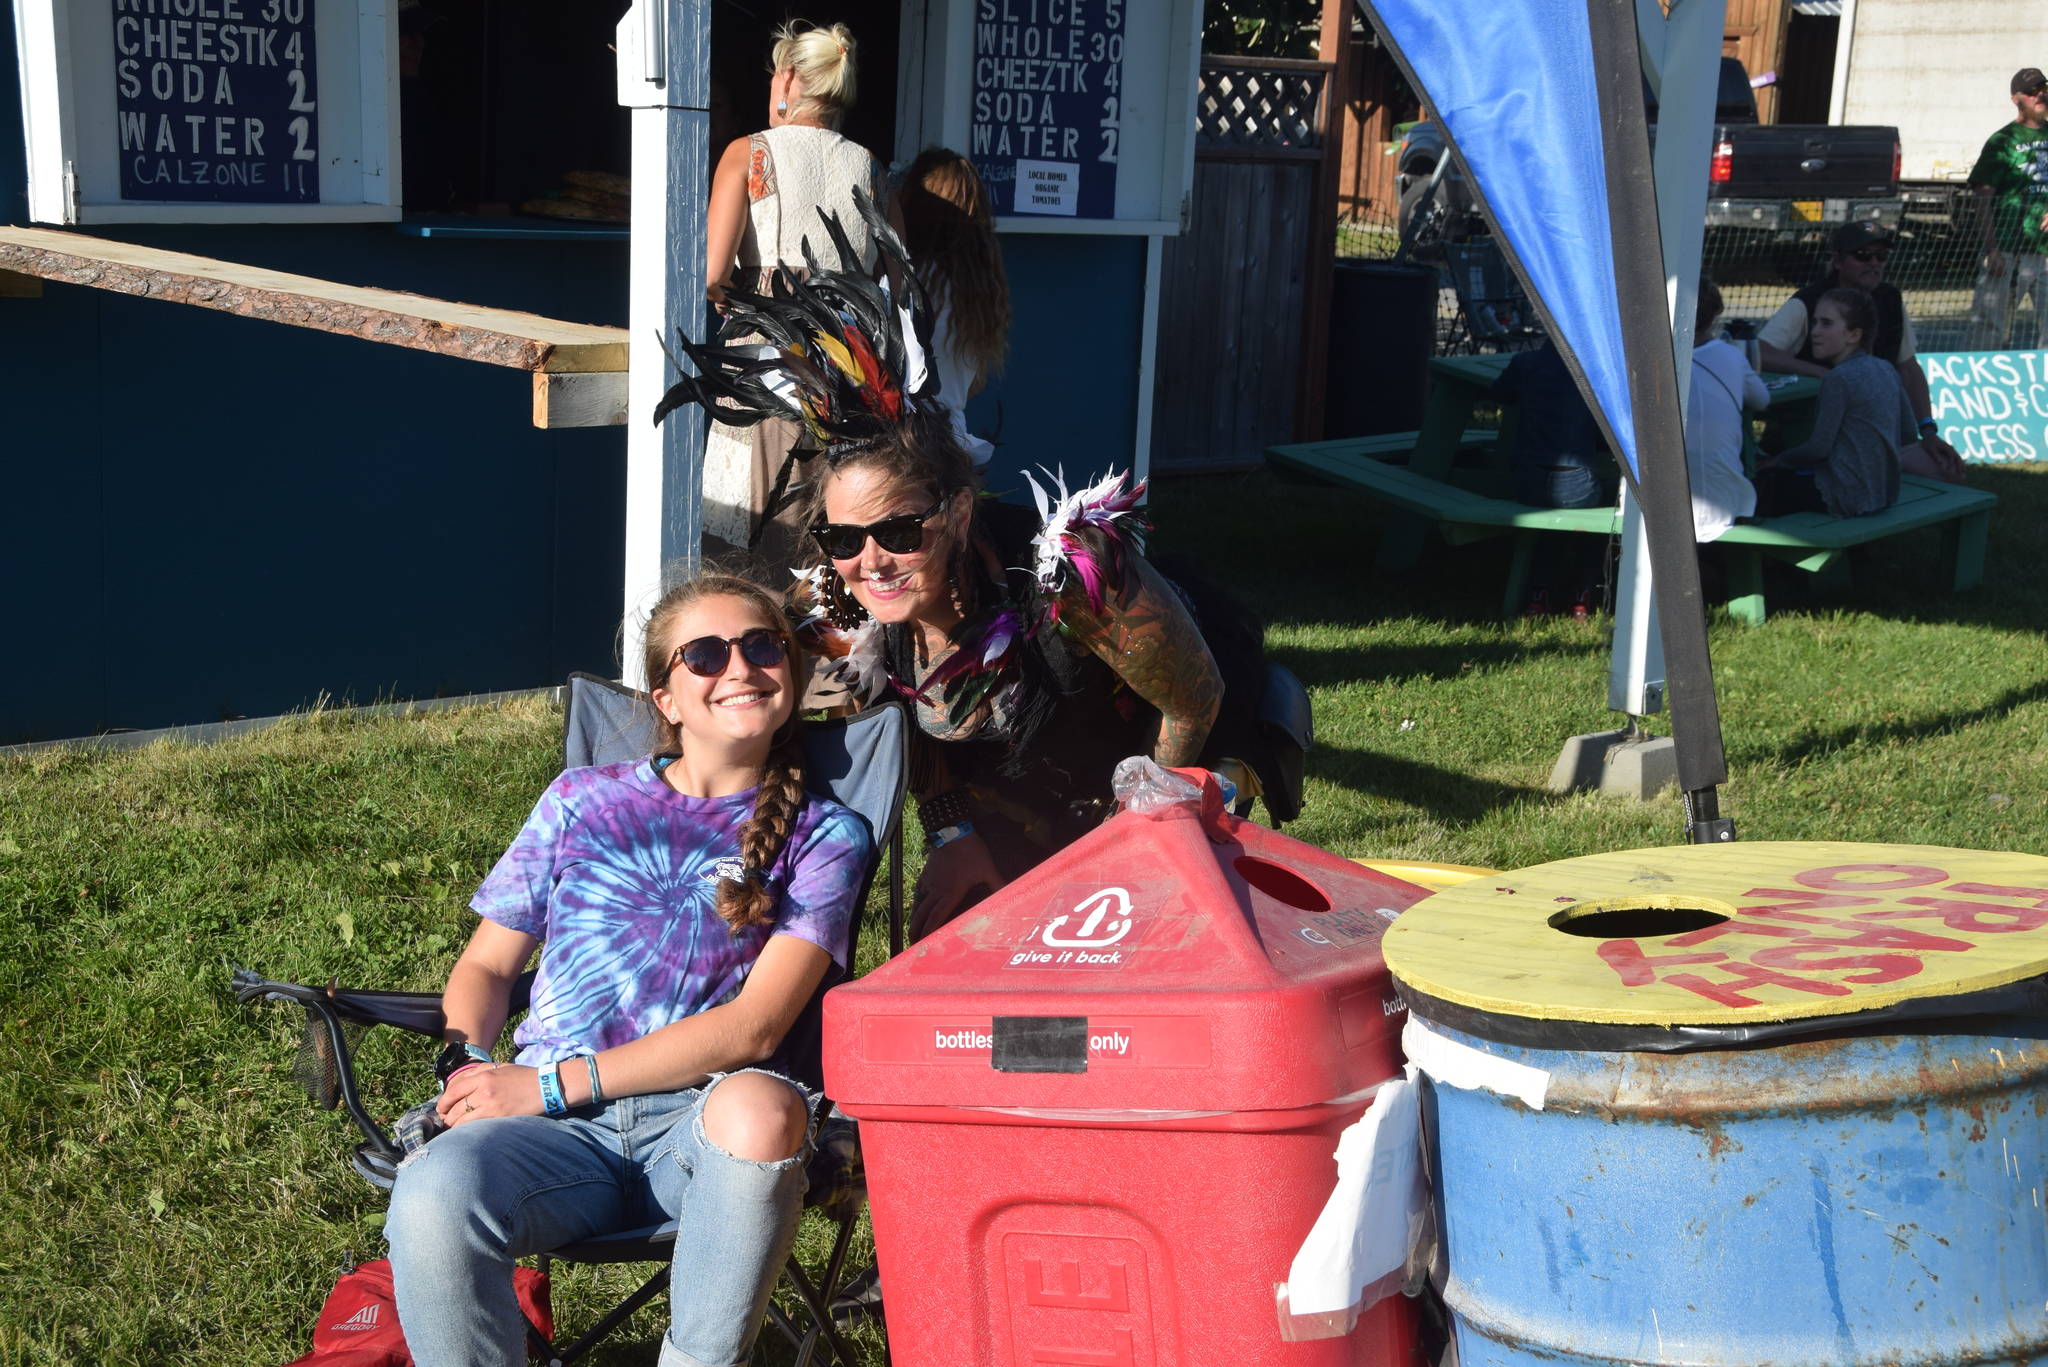 Photo by Brian Mazurek/Peninsula Clarion                                 Rosie Skovron, left, and a Salmonfest attendee smile for the camera at one of the waste disposal stations during Salmonfest 2019 in Ninilchik, Alaska on August 2, 2019. Skovron is a volunteer for the Zero Waste project and an intern at Cook Inletkeeper.